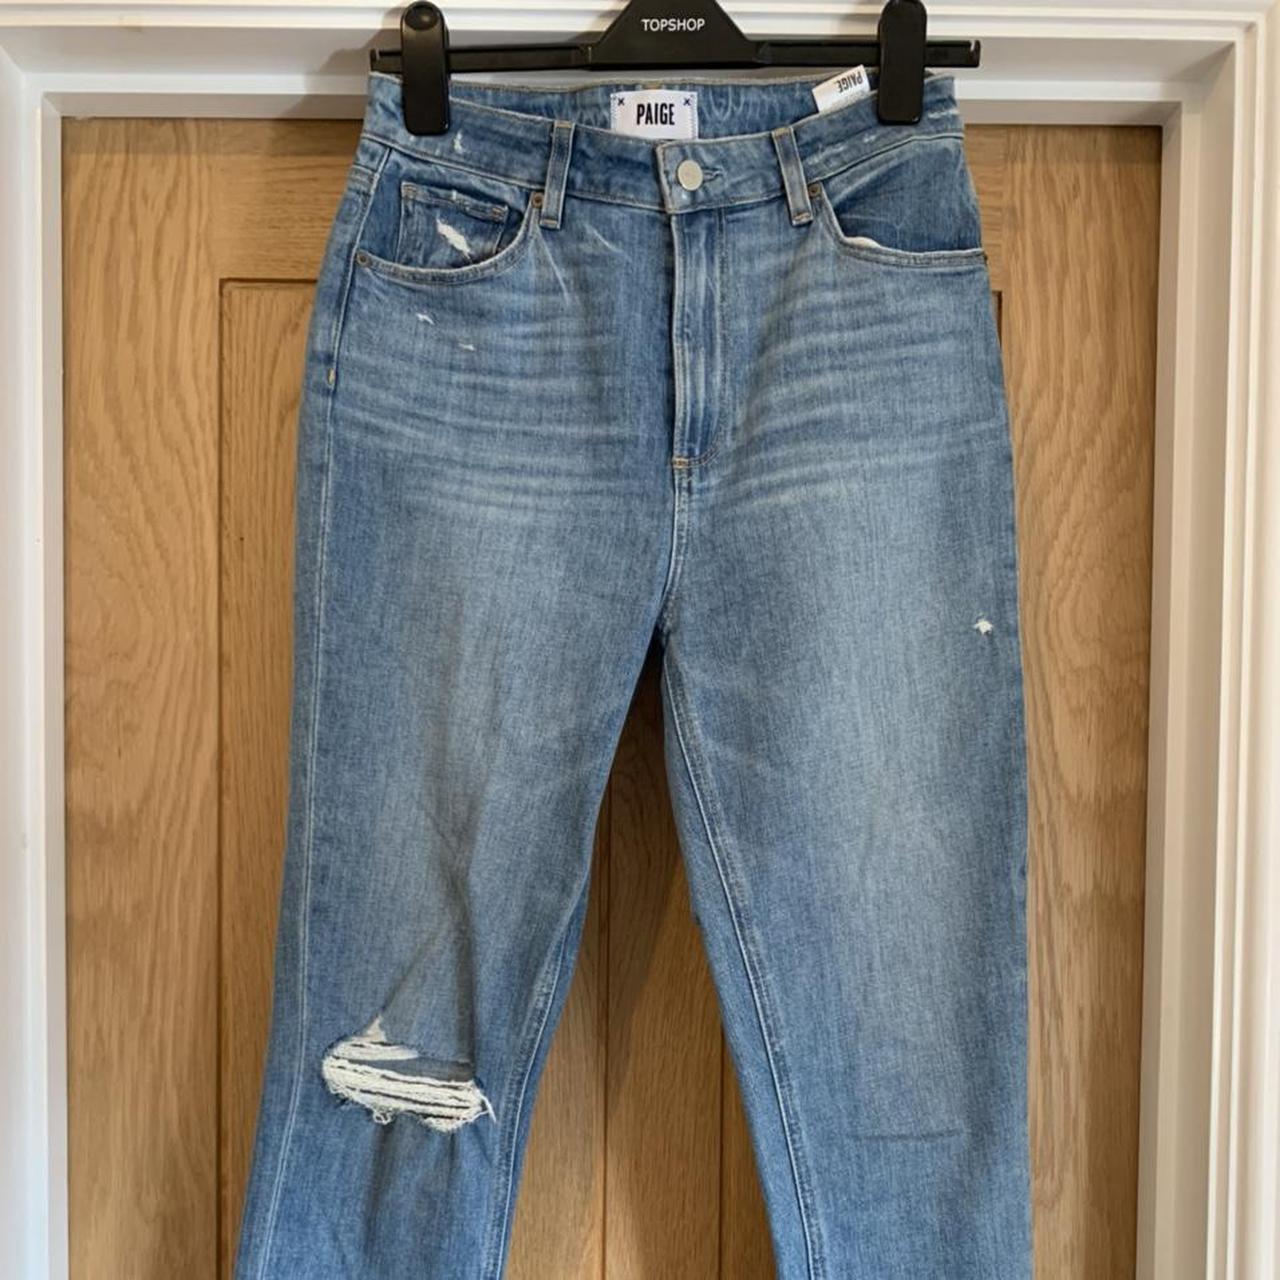 Paige, high waisted, ripped jeans Size 28 Never... - Depop